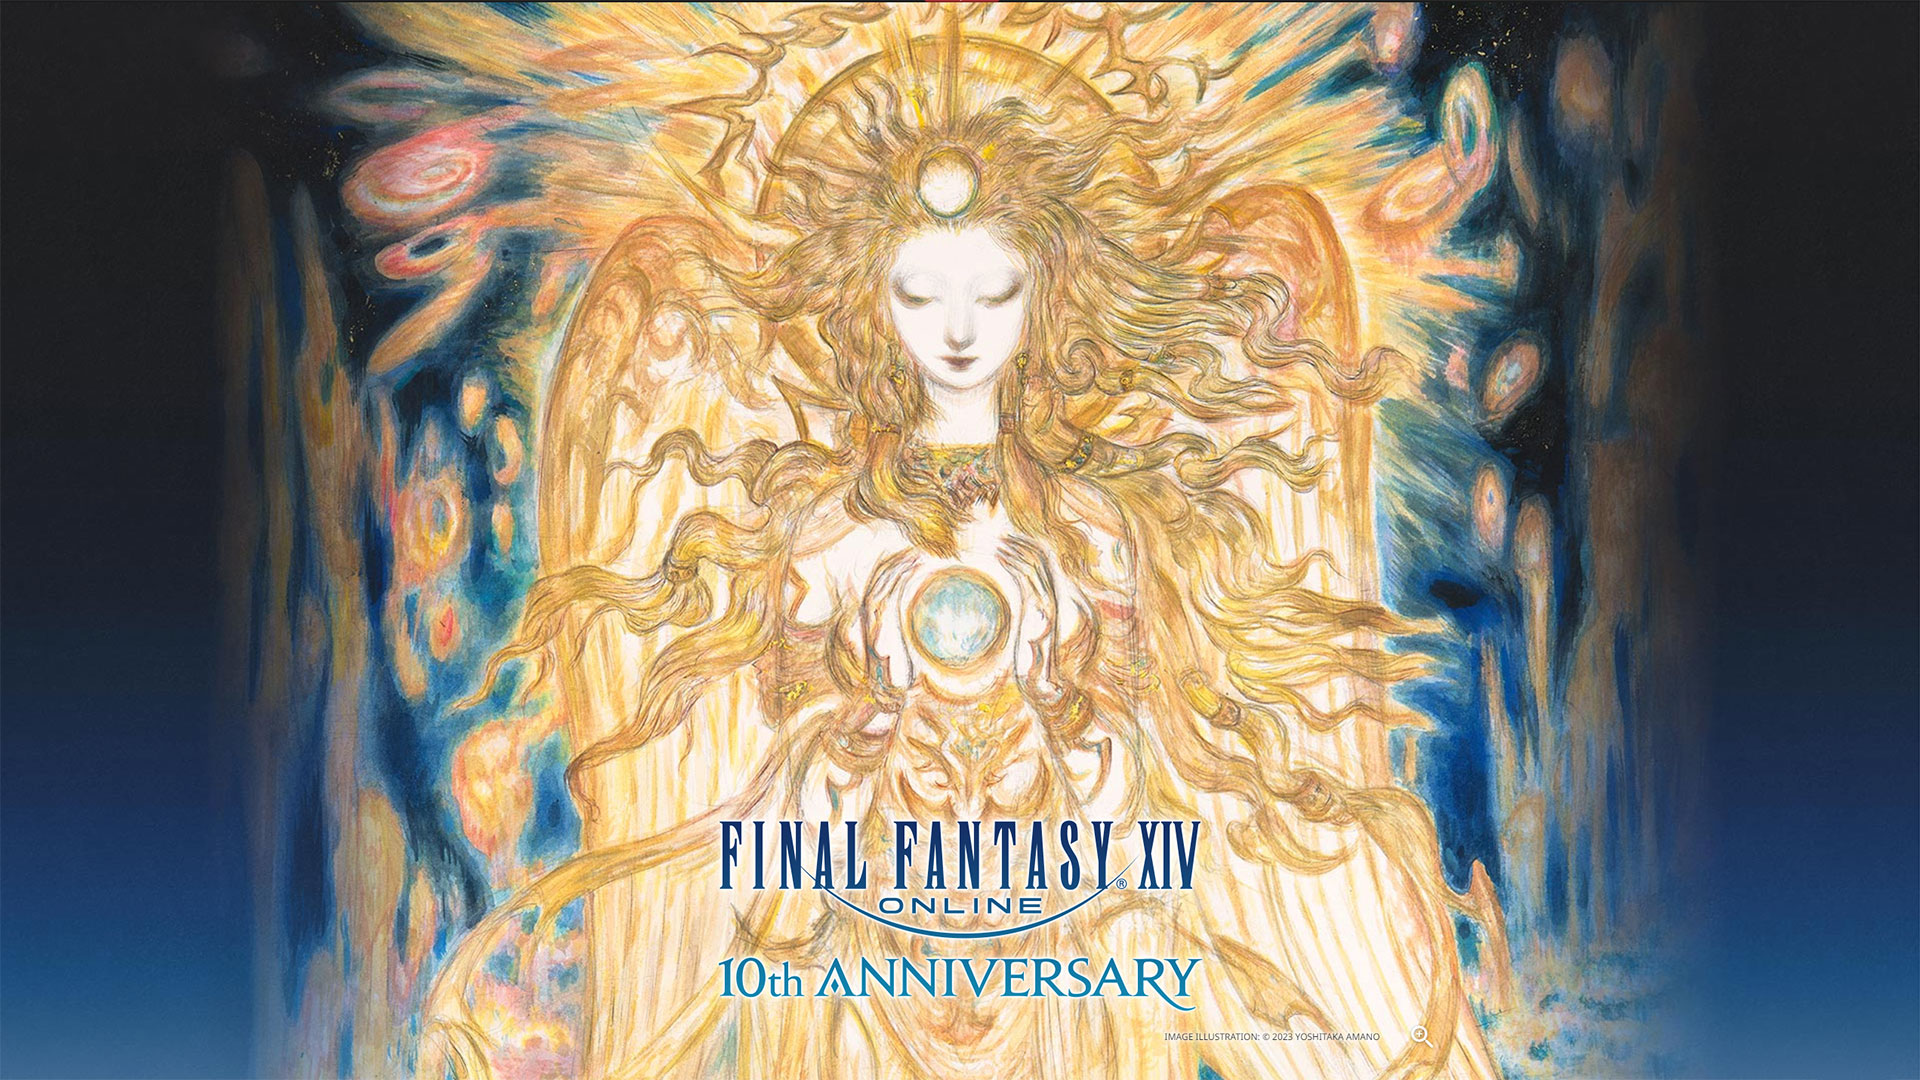 It's hard to believe it has been 10 years since the official release of Final Fantasy XIV: A Realm Reborn